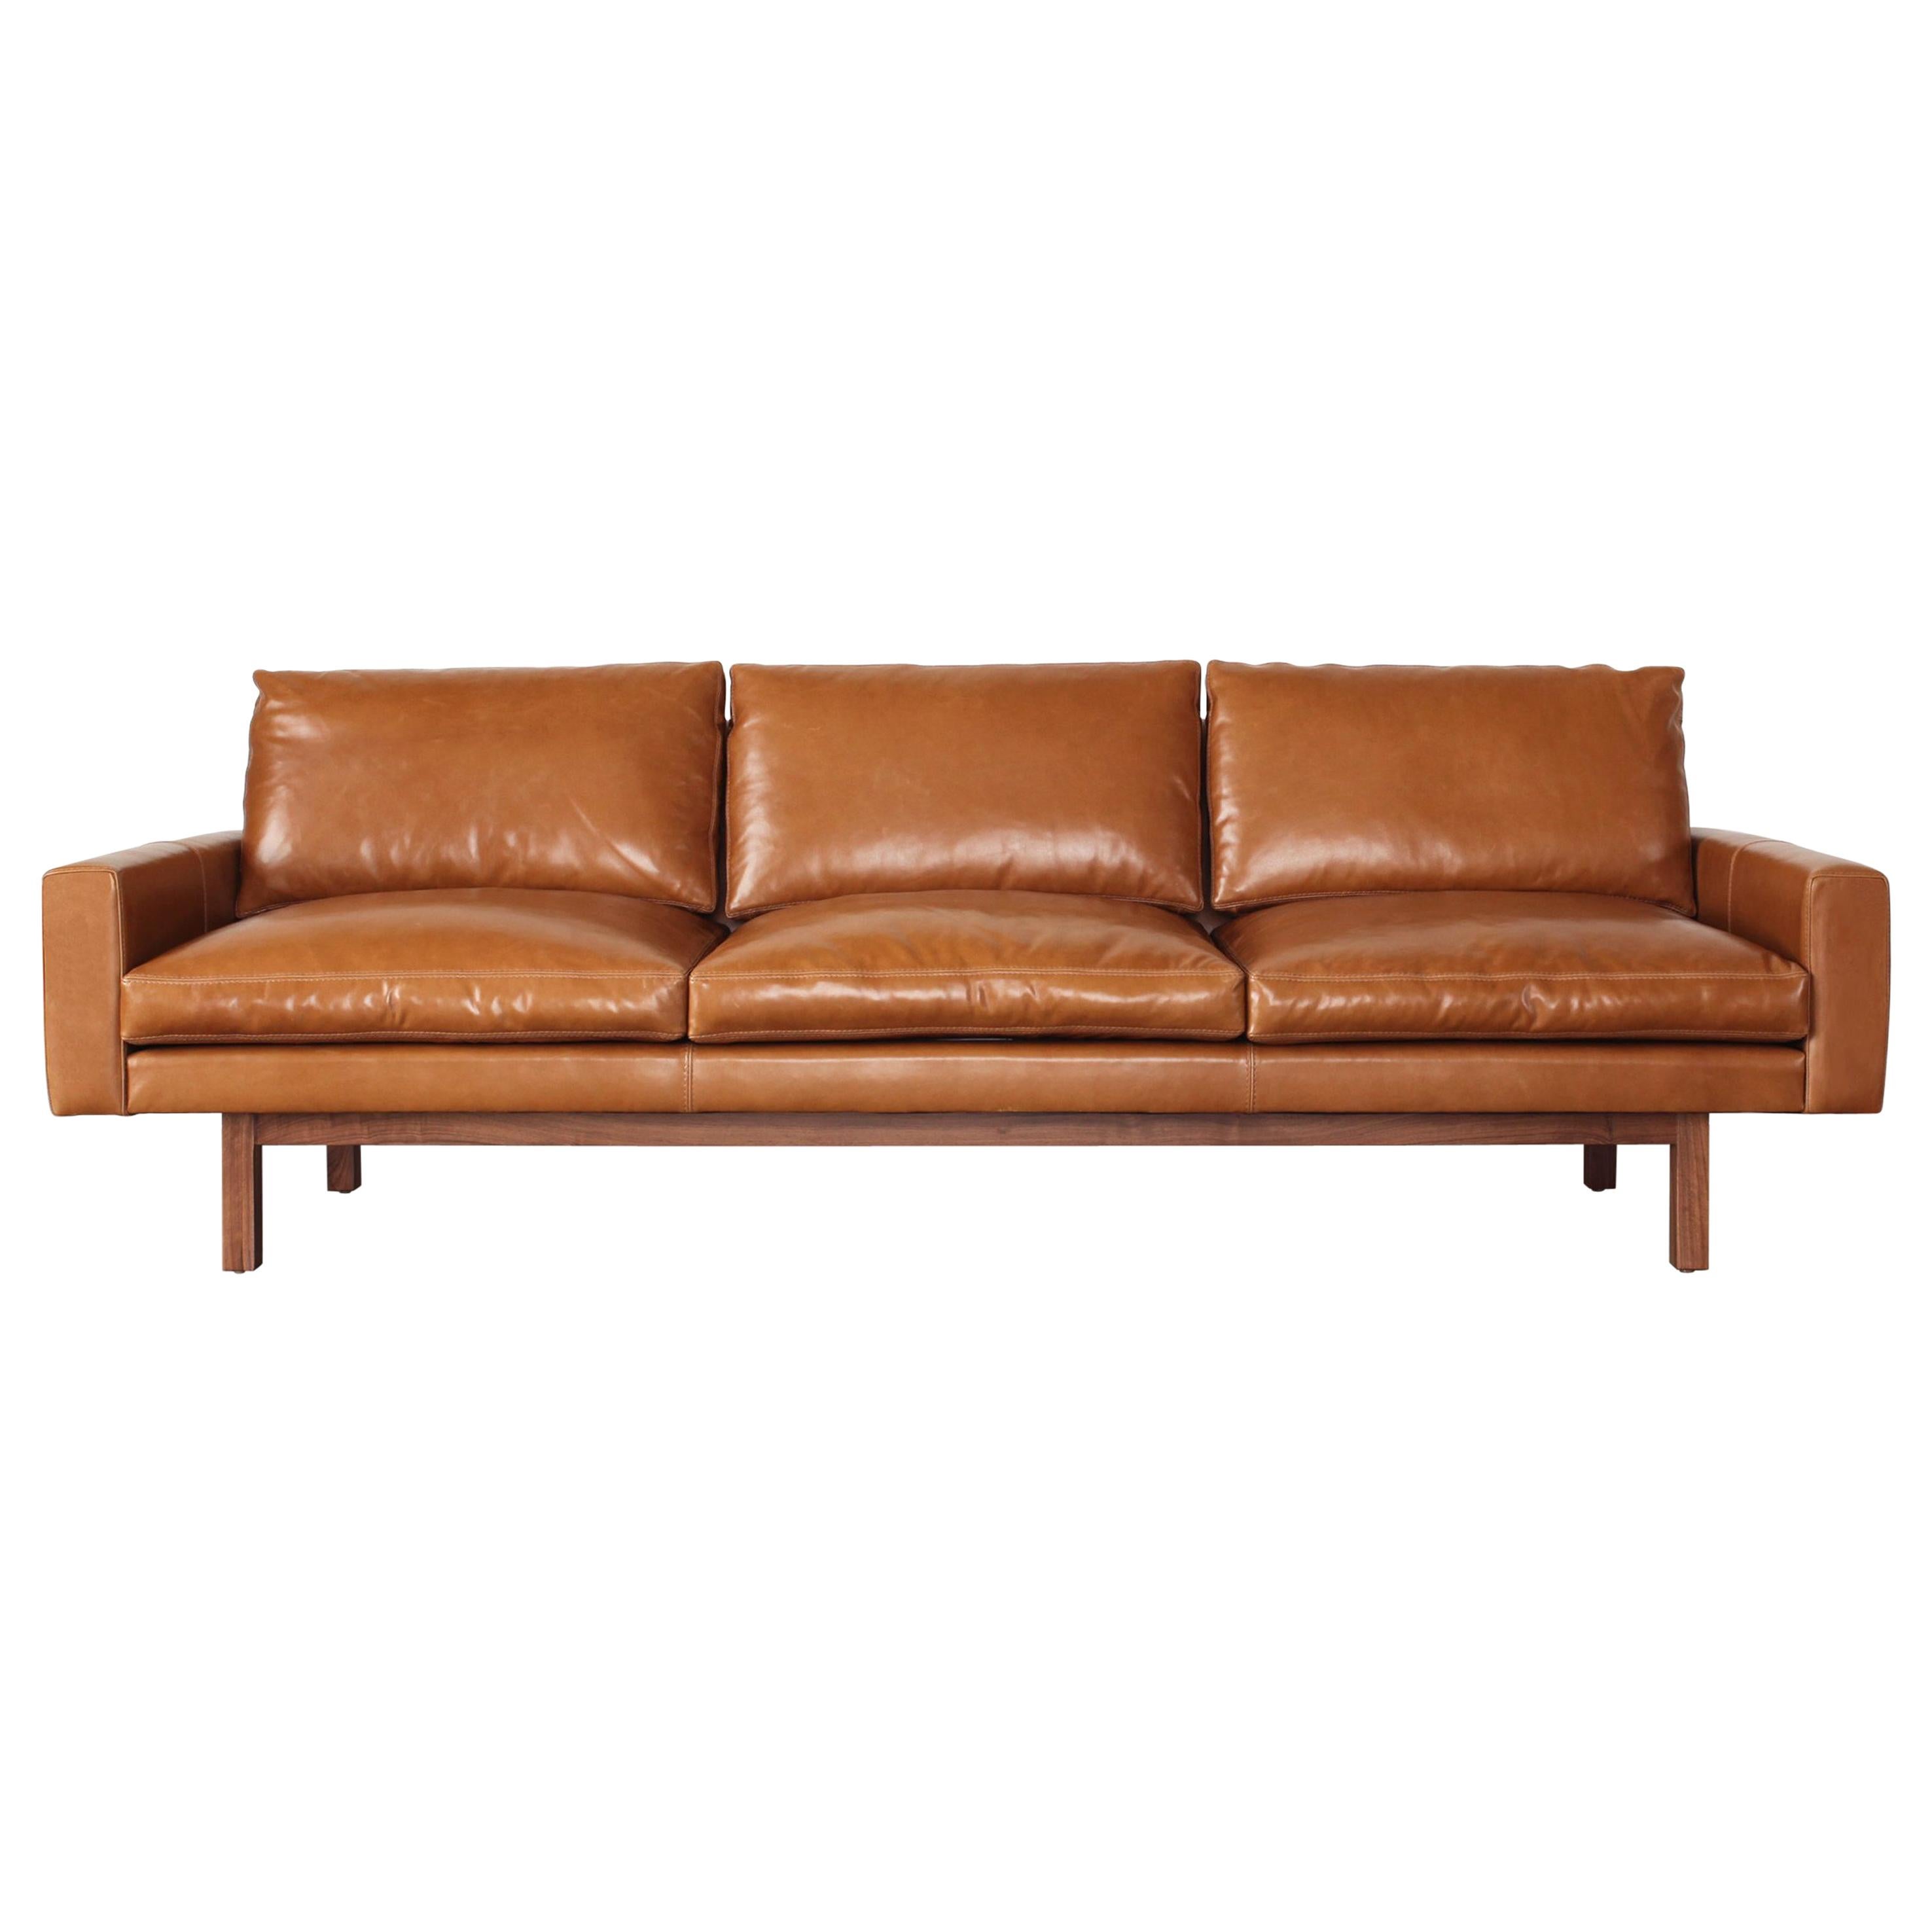 Contemporary Large Standard Sofa in Caramel Leather with Walnut Base For Sale